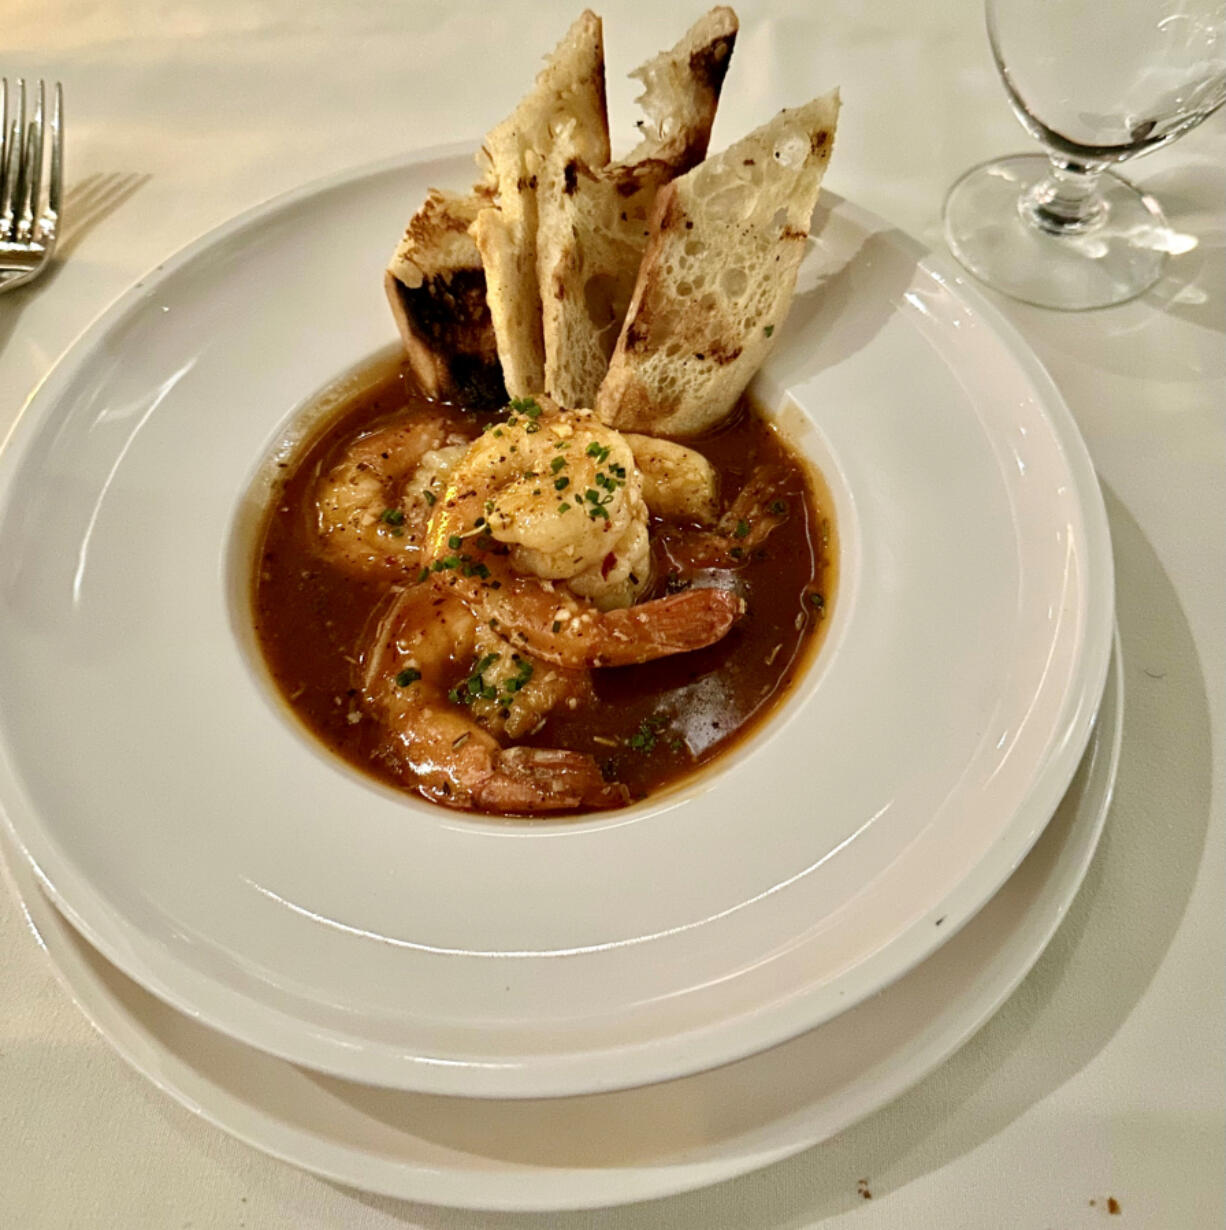 El Gaucho in Vancouver offers Wicked Shrimp as a starter.